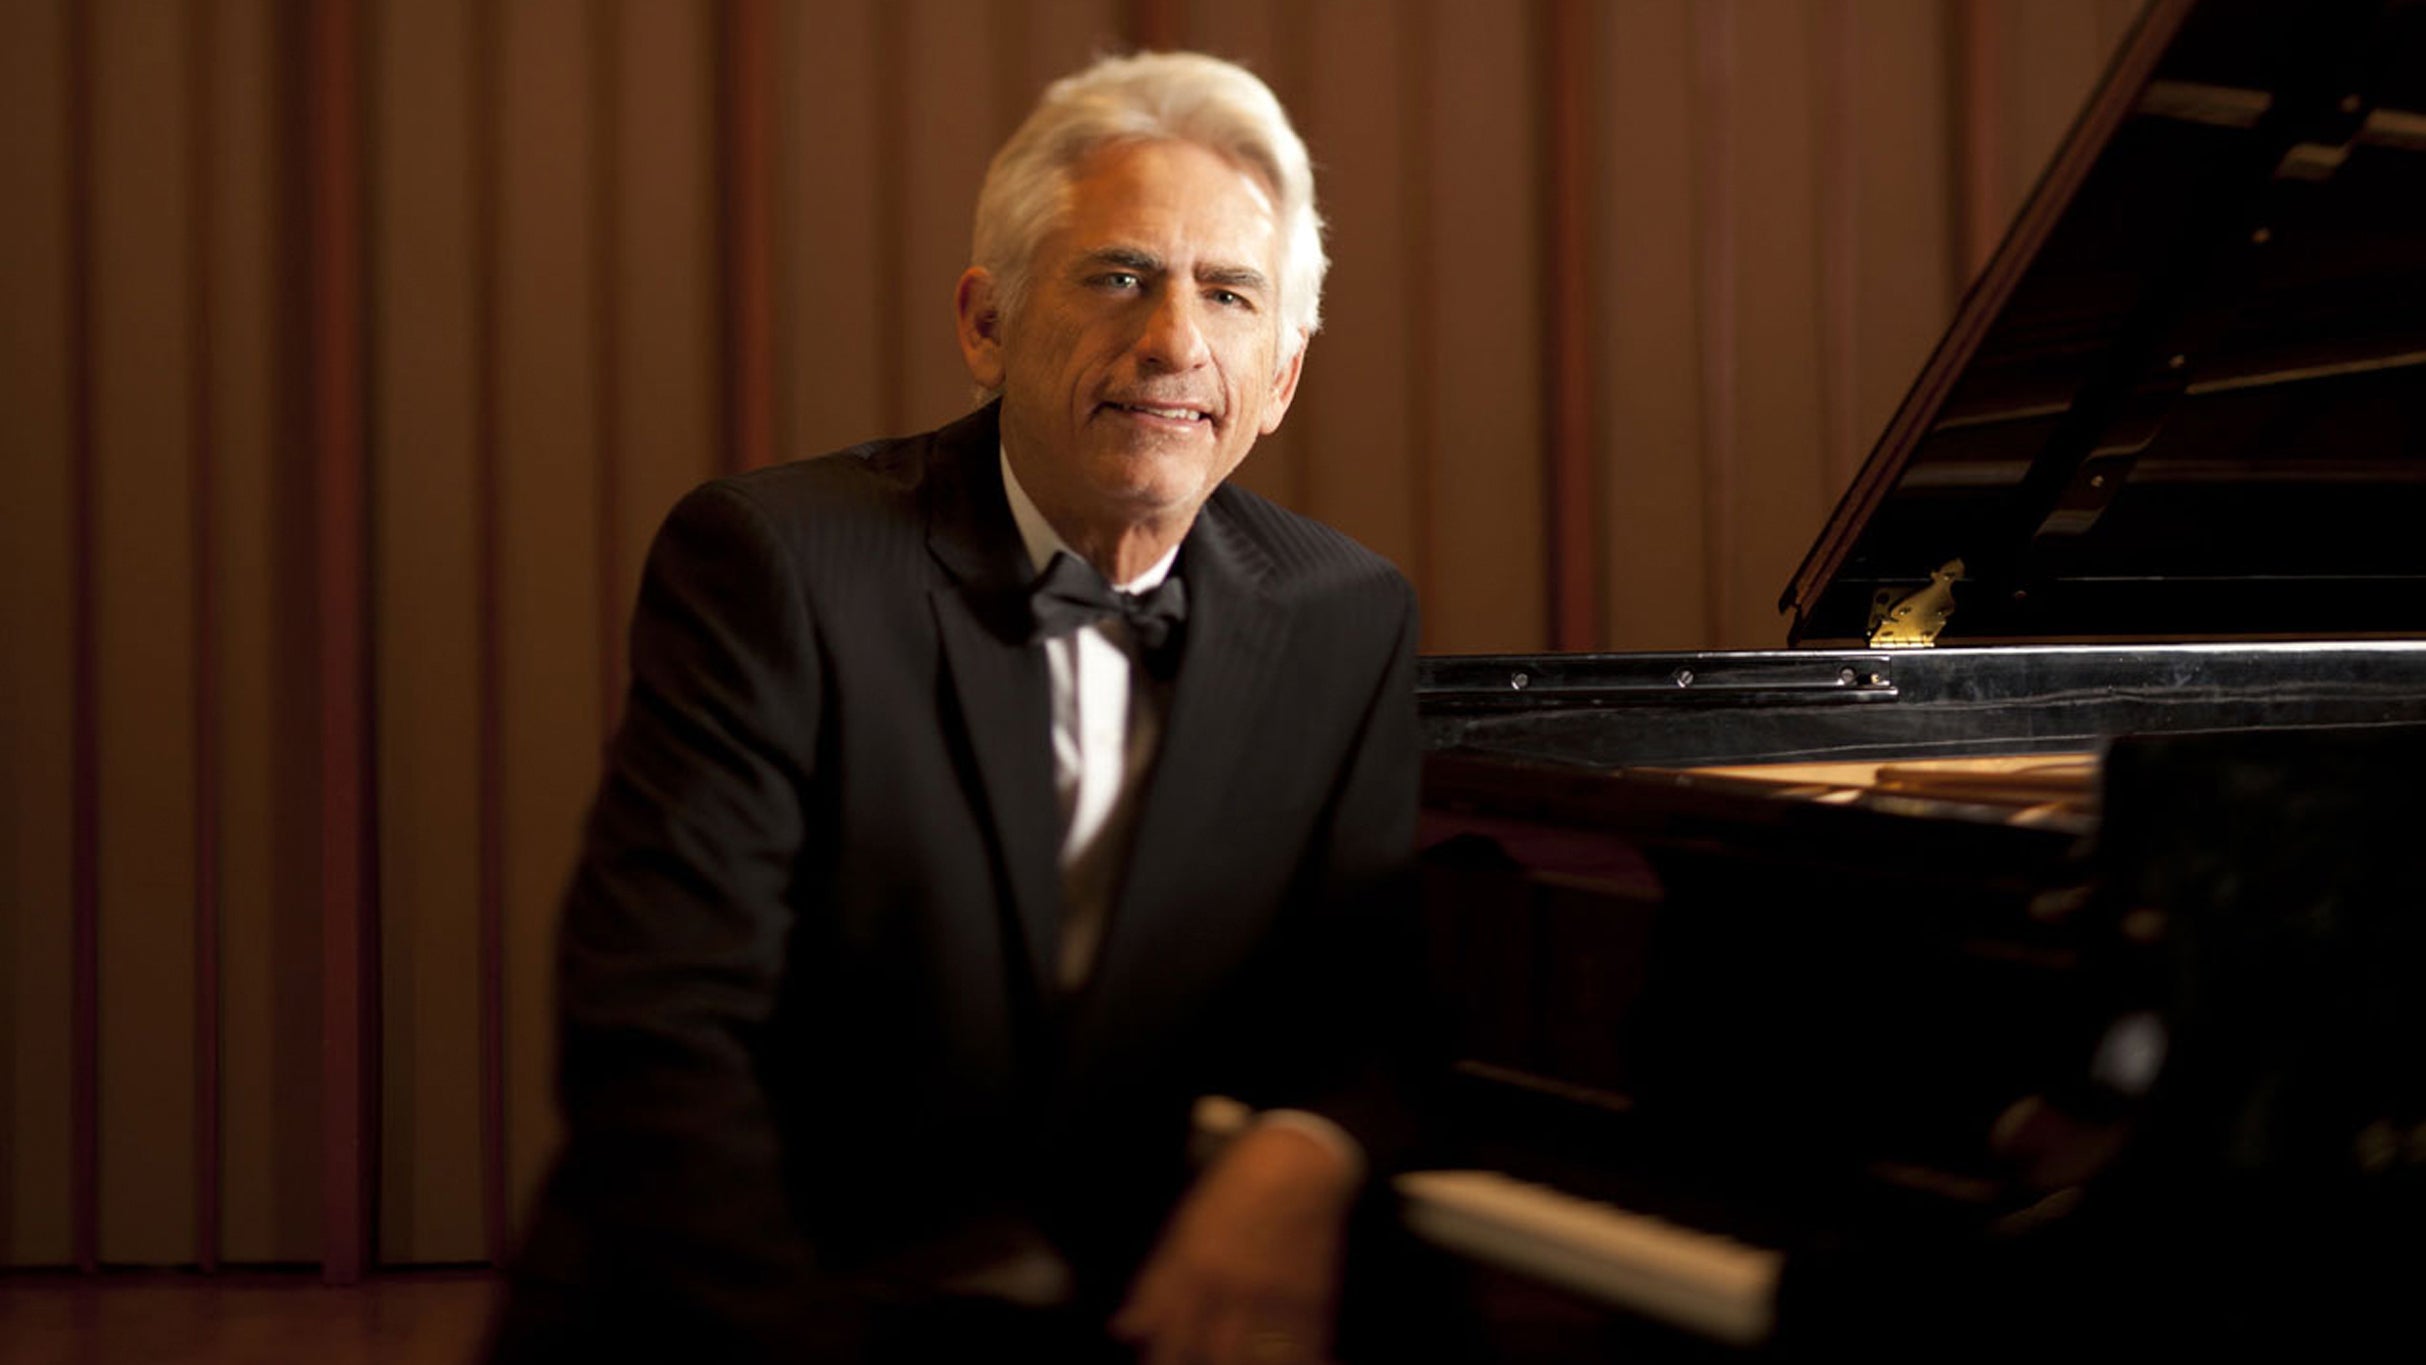 David Benoit Christmas Tribute to Charlie Brown presale code for performance tickets in Red Bank, NJ (The Vogel at Count Basie Center for the Arts)